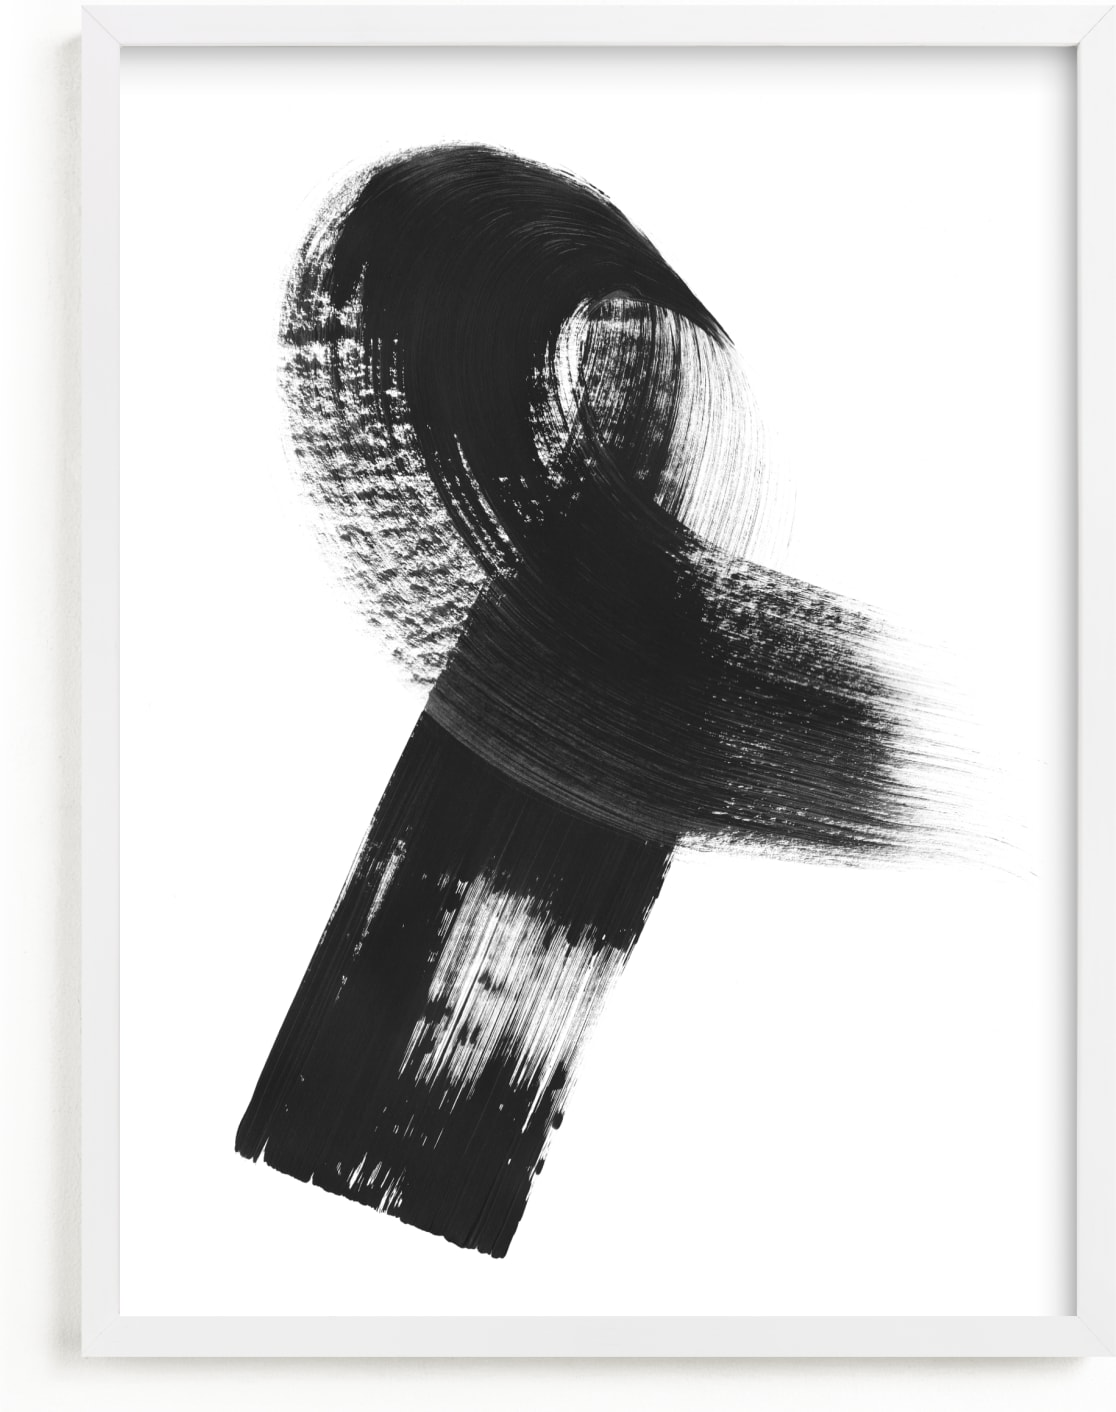 This is a black and white art by MinimalType called Swash.